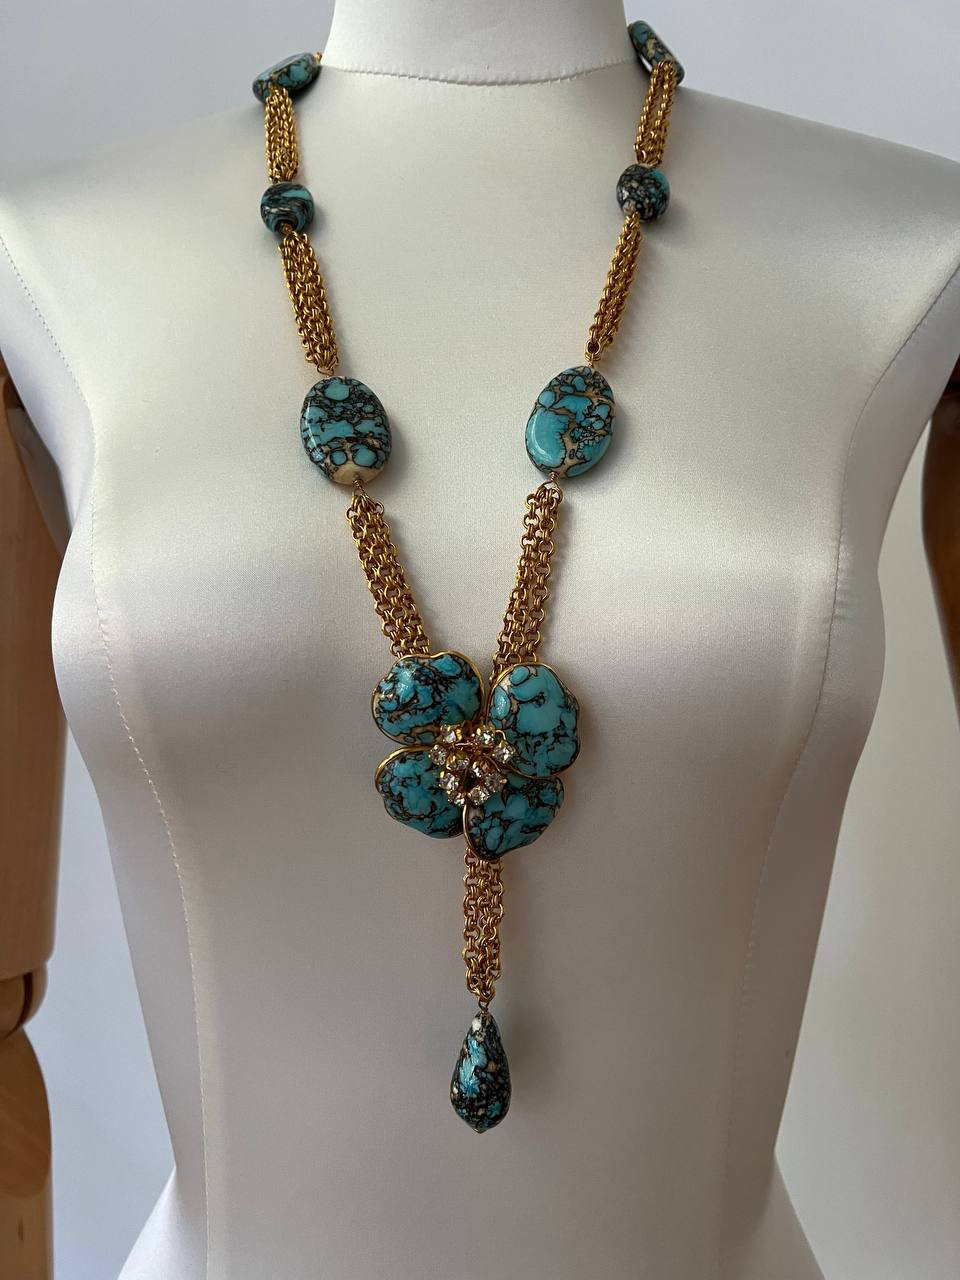 Coco Chanel Gripoix Turquoise Necklace Earrings Set  Turquoise necklace,  Necklace earring set, Chanel jewelry necklace